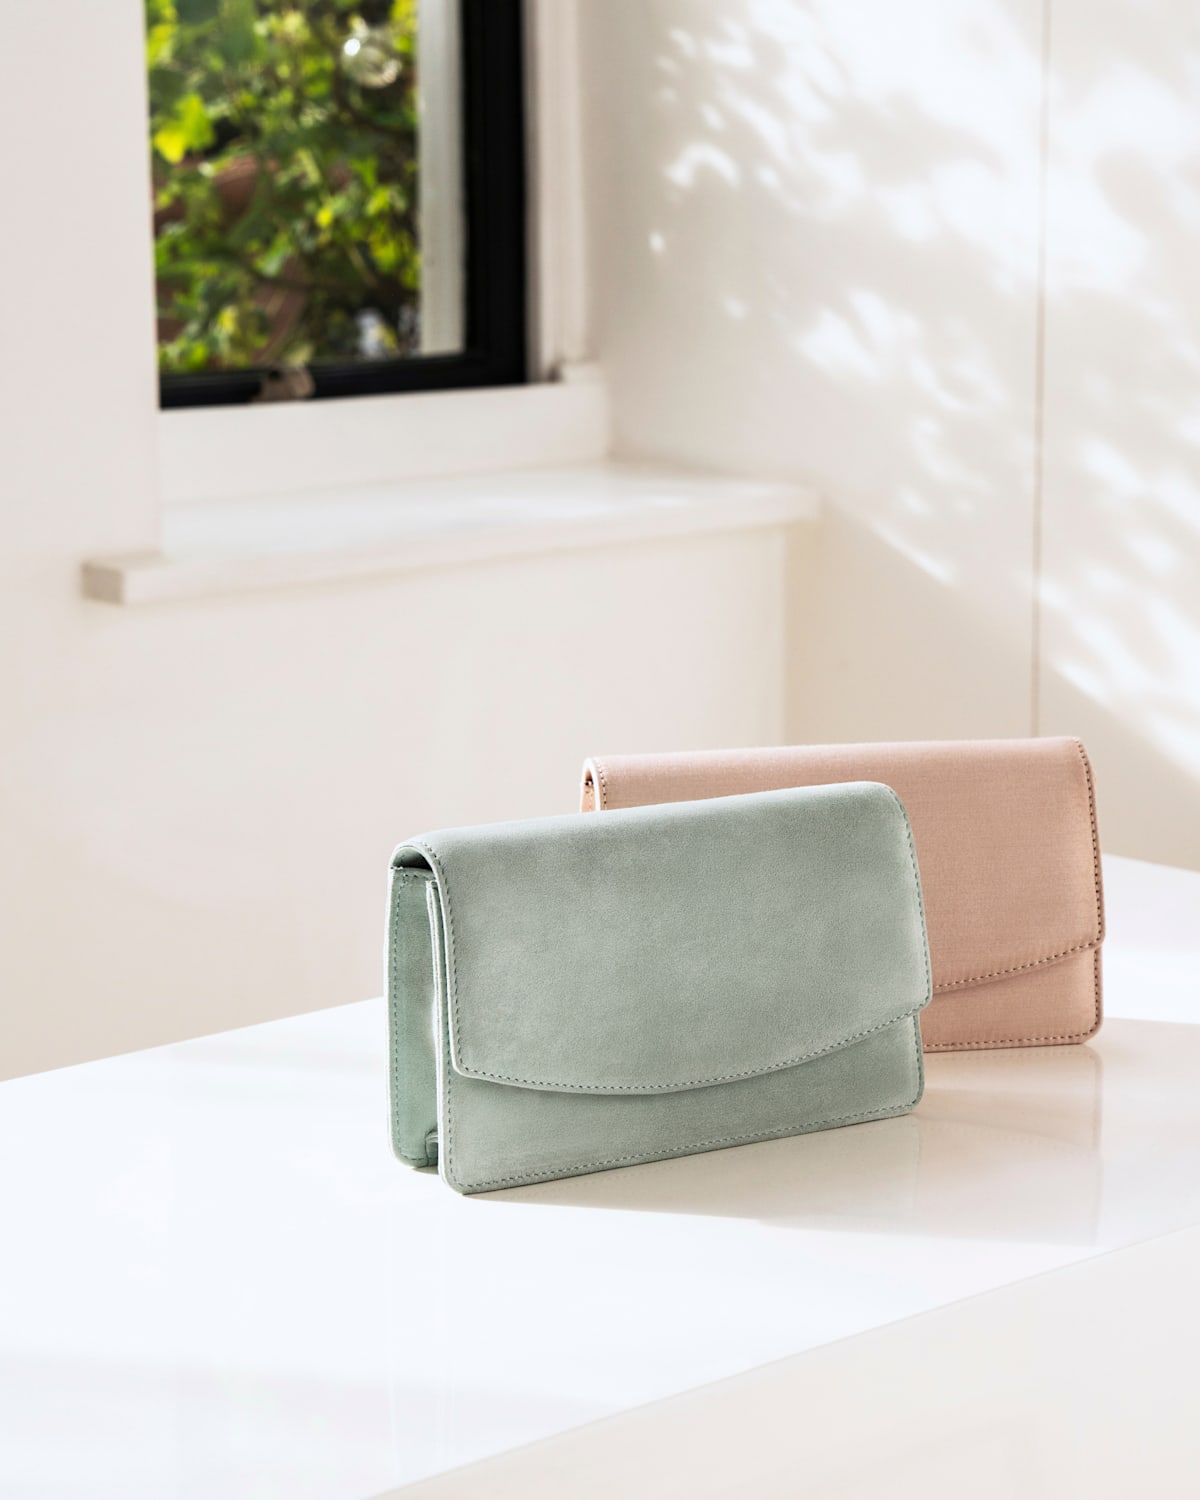 One mint green clutch bag and one oyster clutch bag photographed on a window ledge.